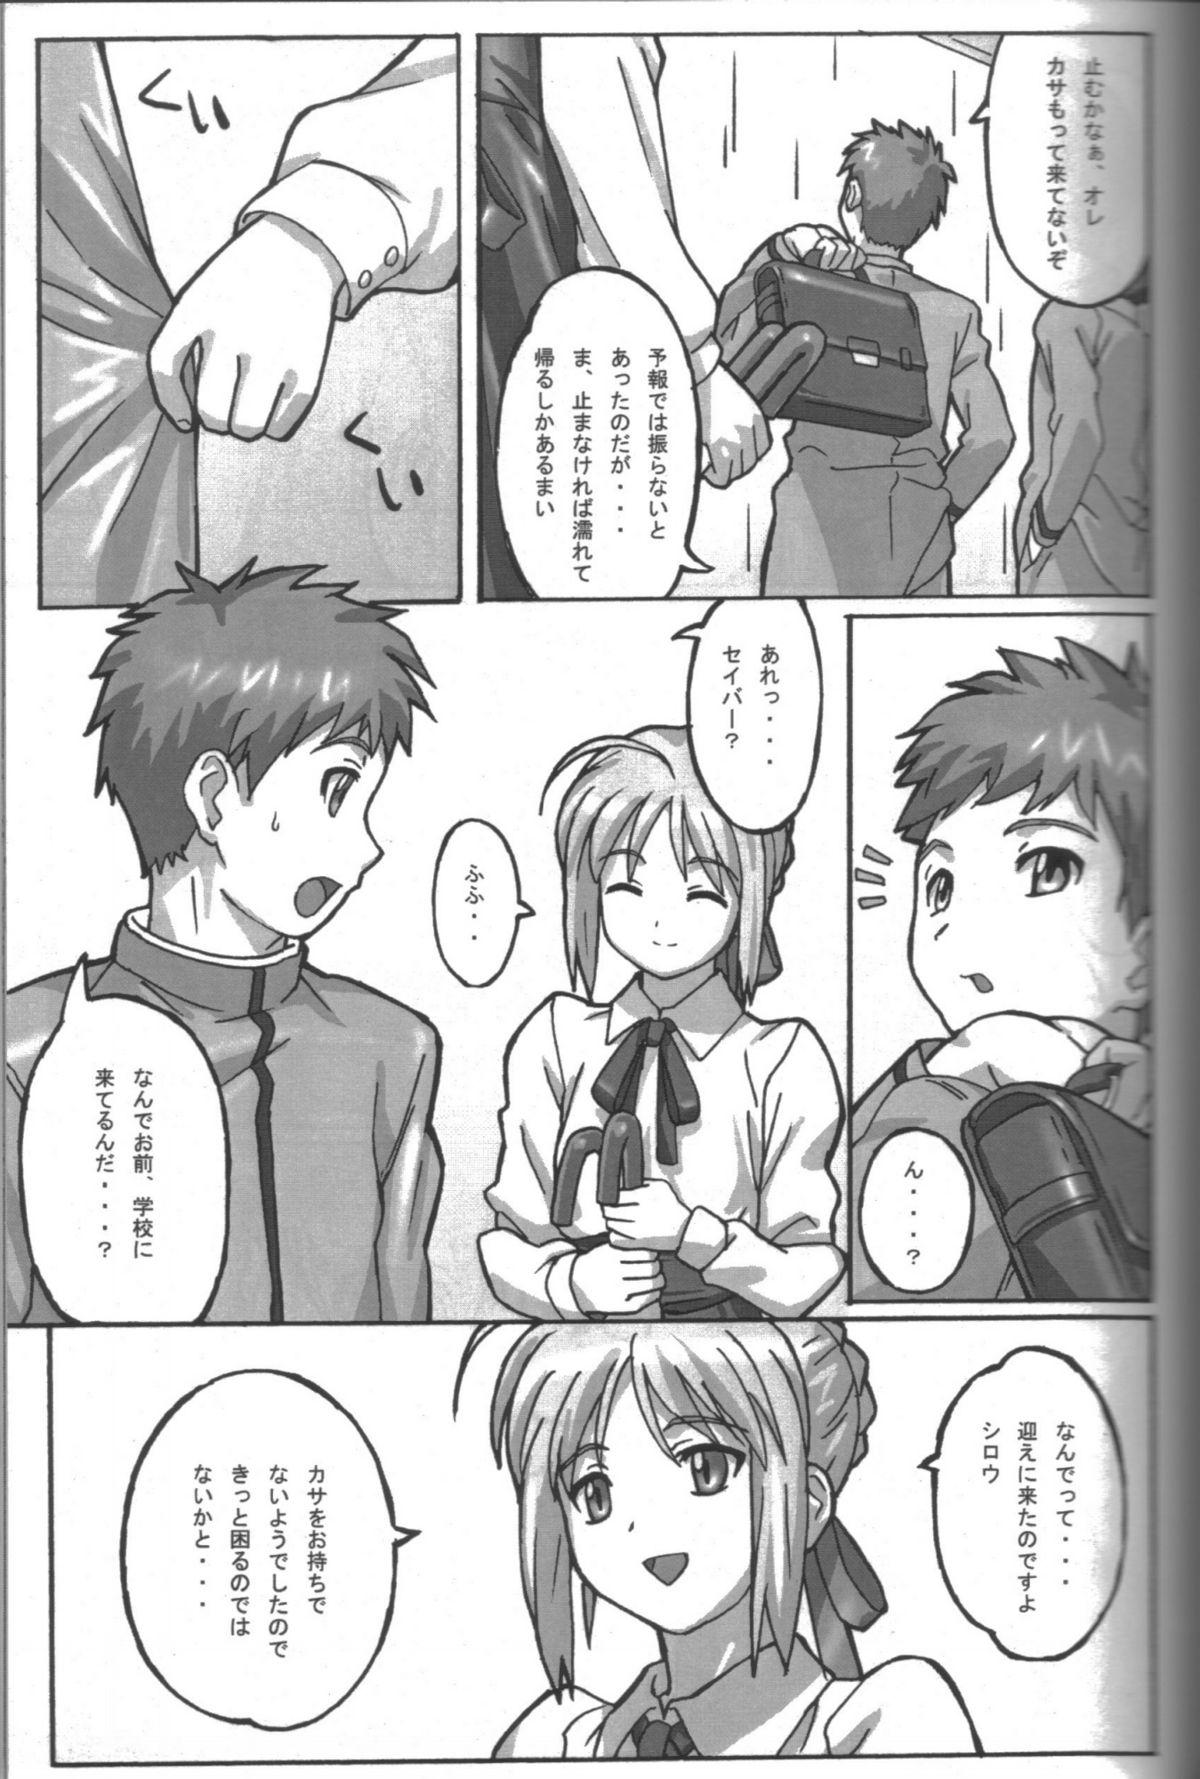 Gostoso A PIECE OF CAKE - Fate stay night Hidden Camera - Page 6